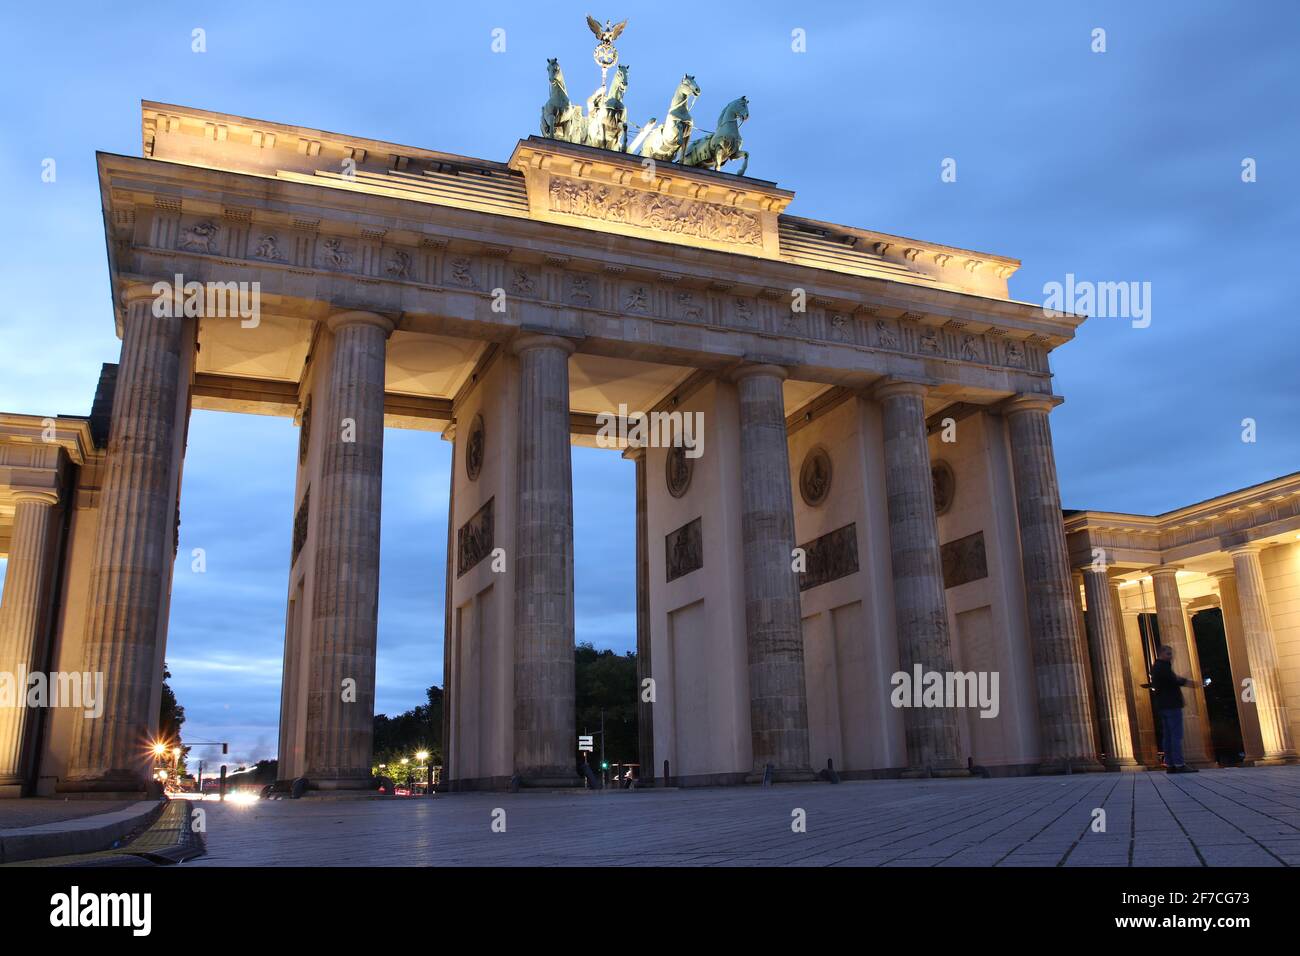 The Brandenburg Gate, landmark of Germany at sunset. It is located in the western part of the city centre of Berlin. Stock Photo